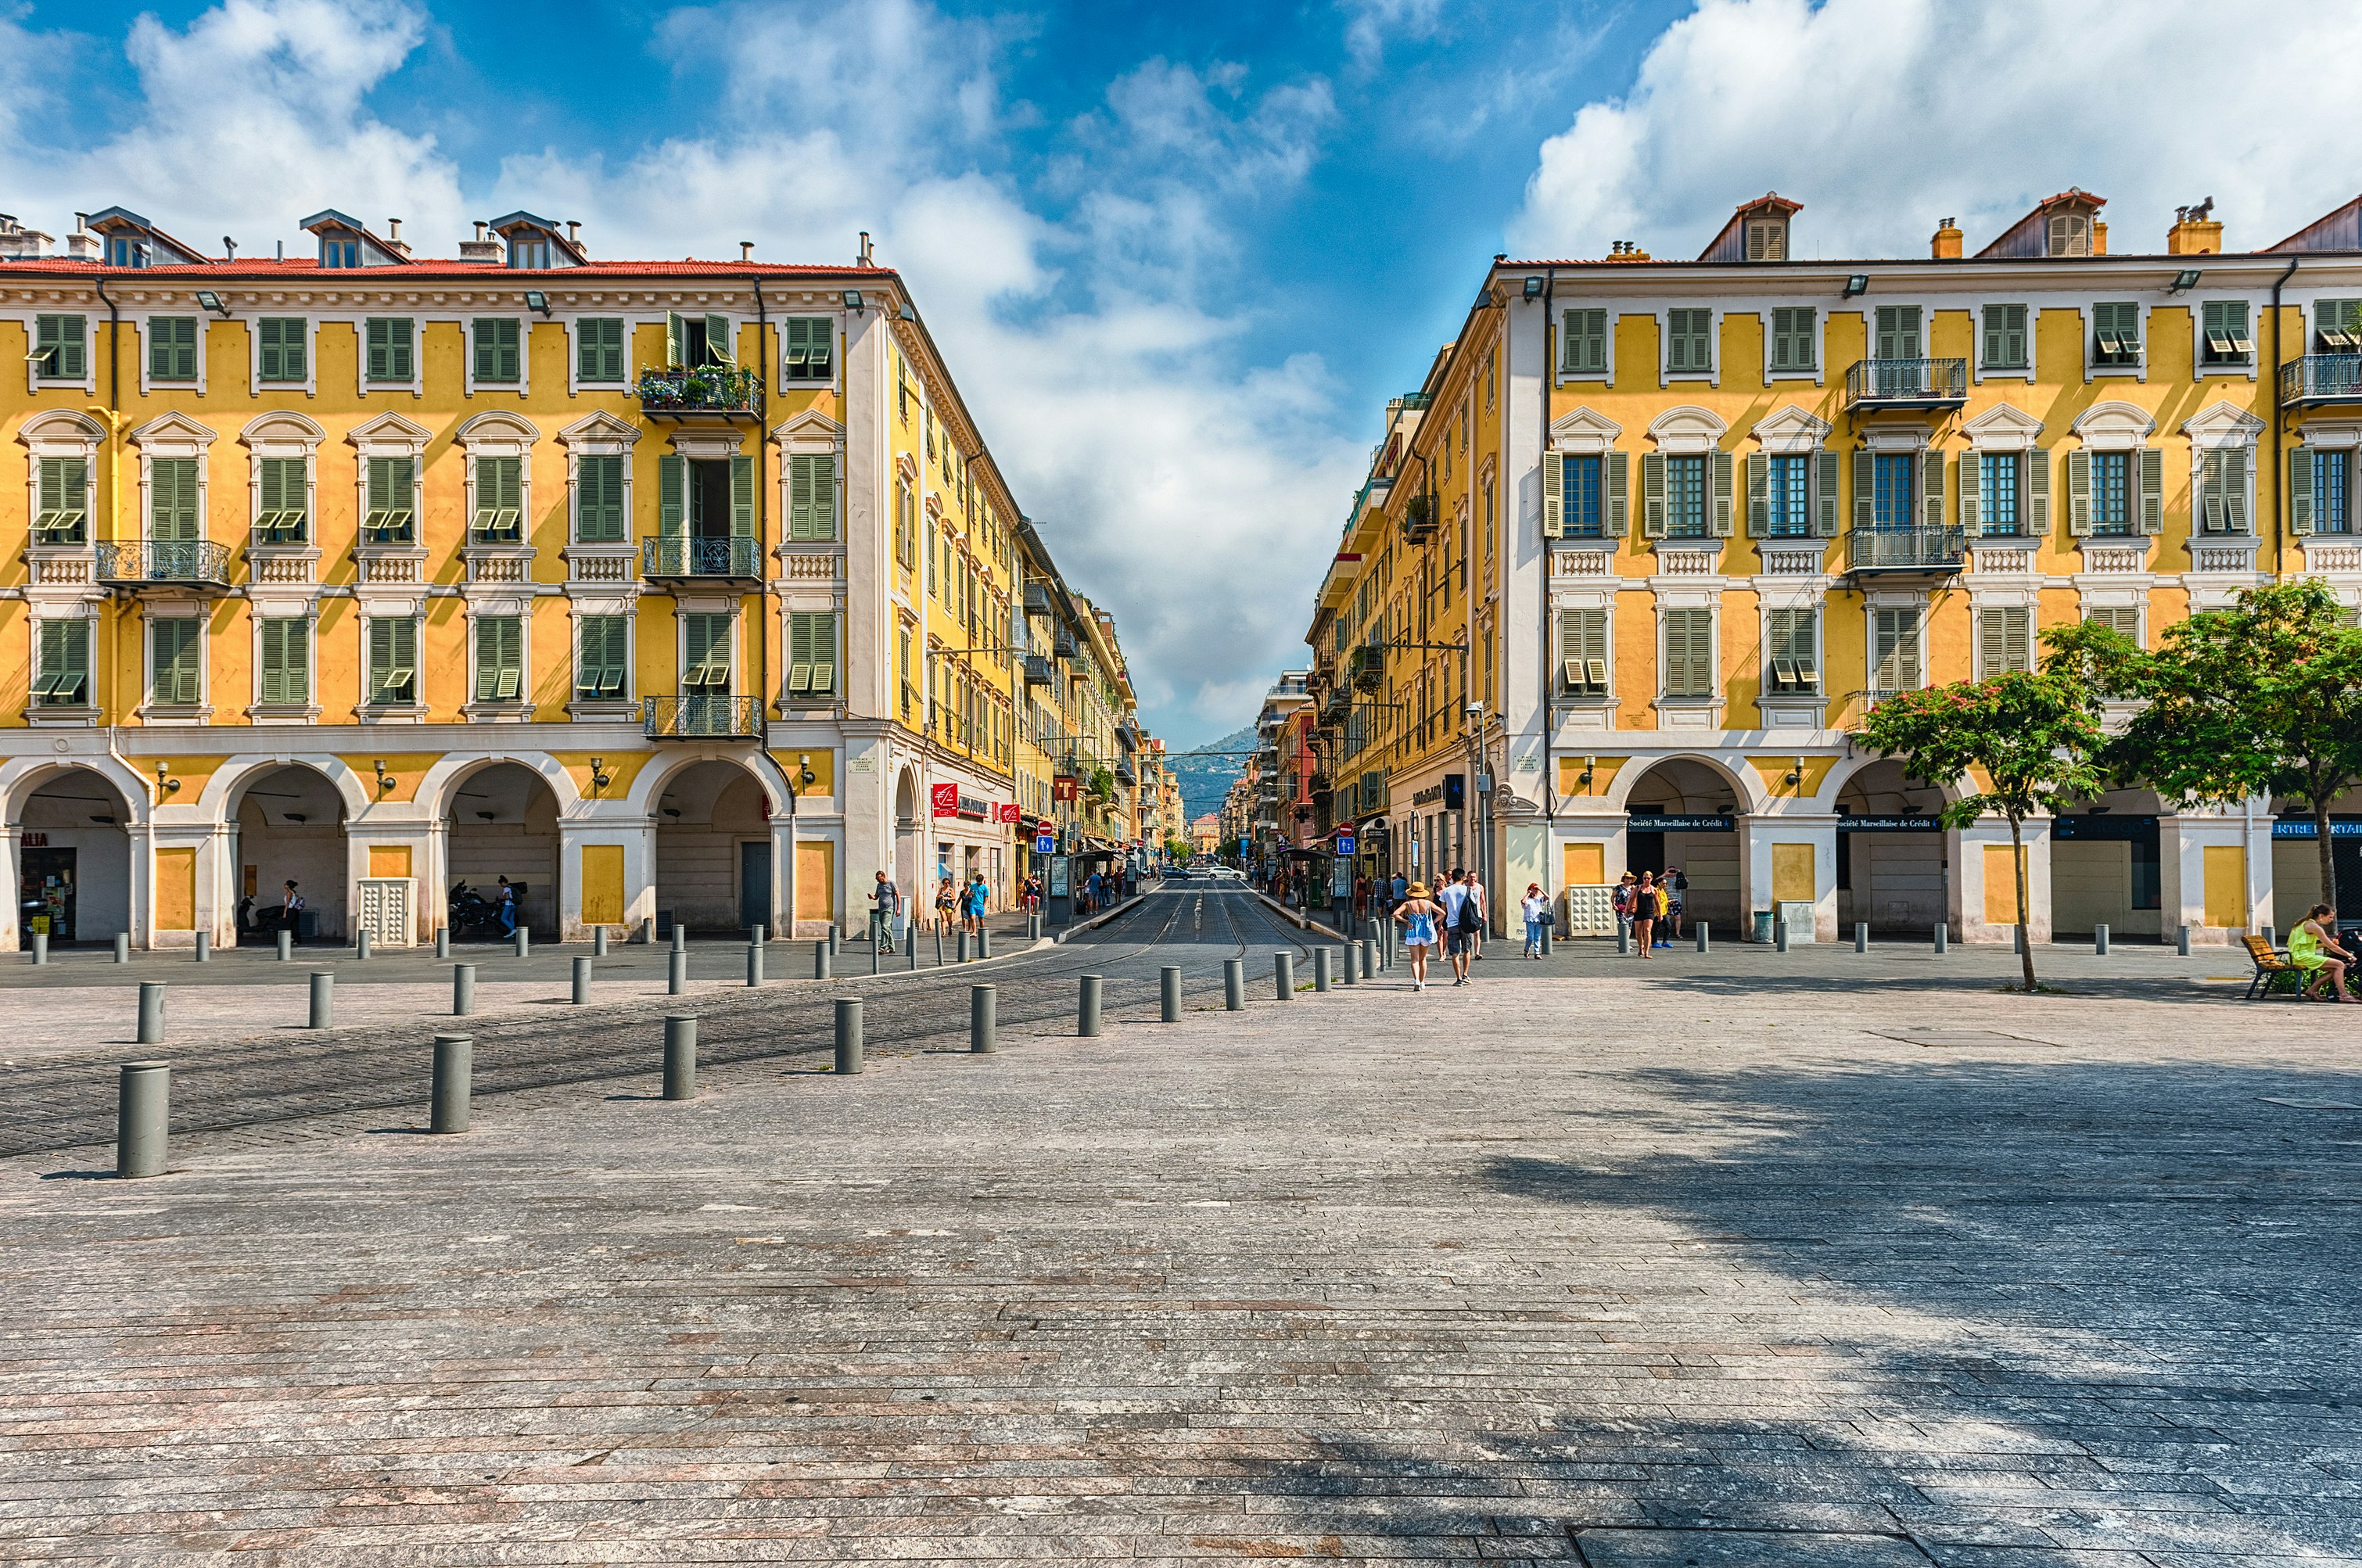 Place Garibaldi, one of the finest squares in Nice, France